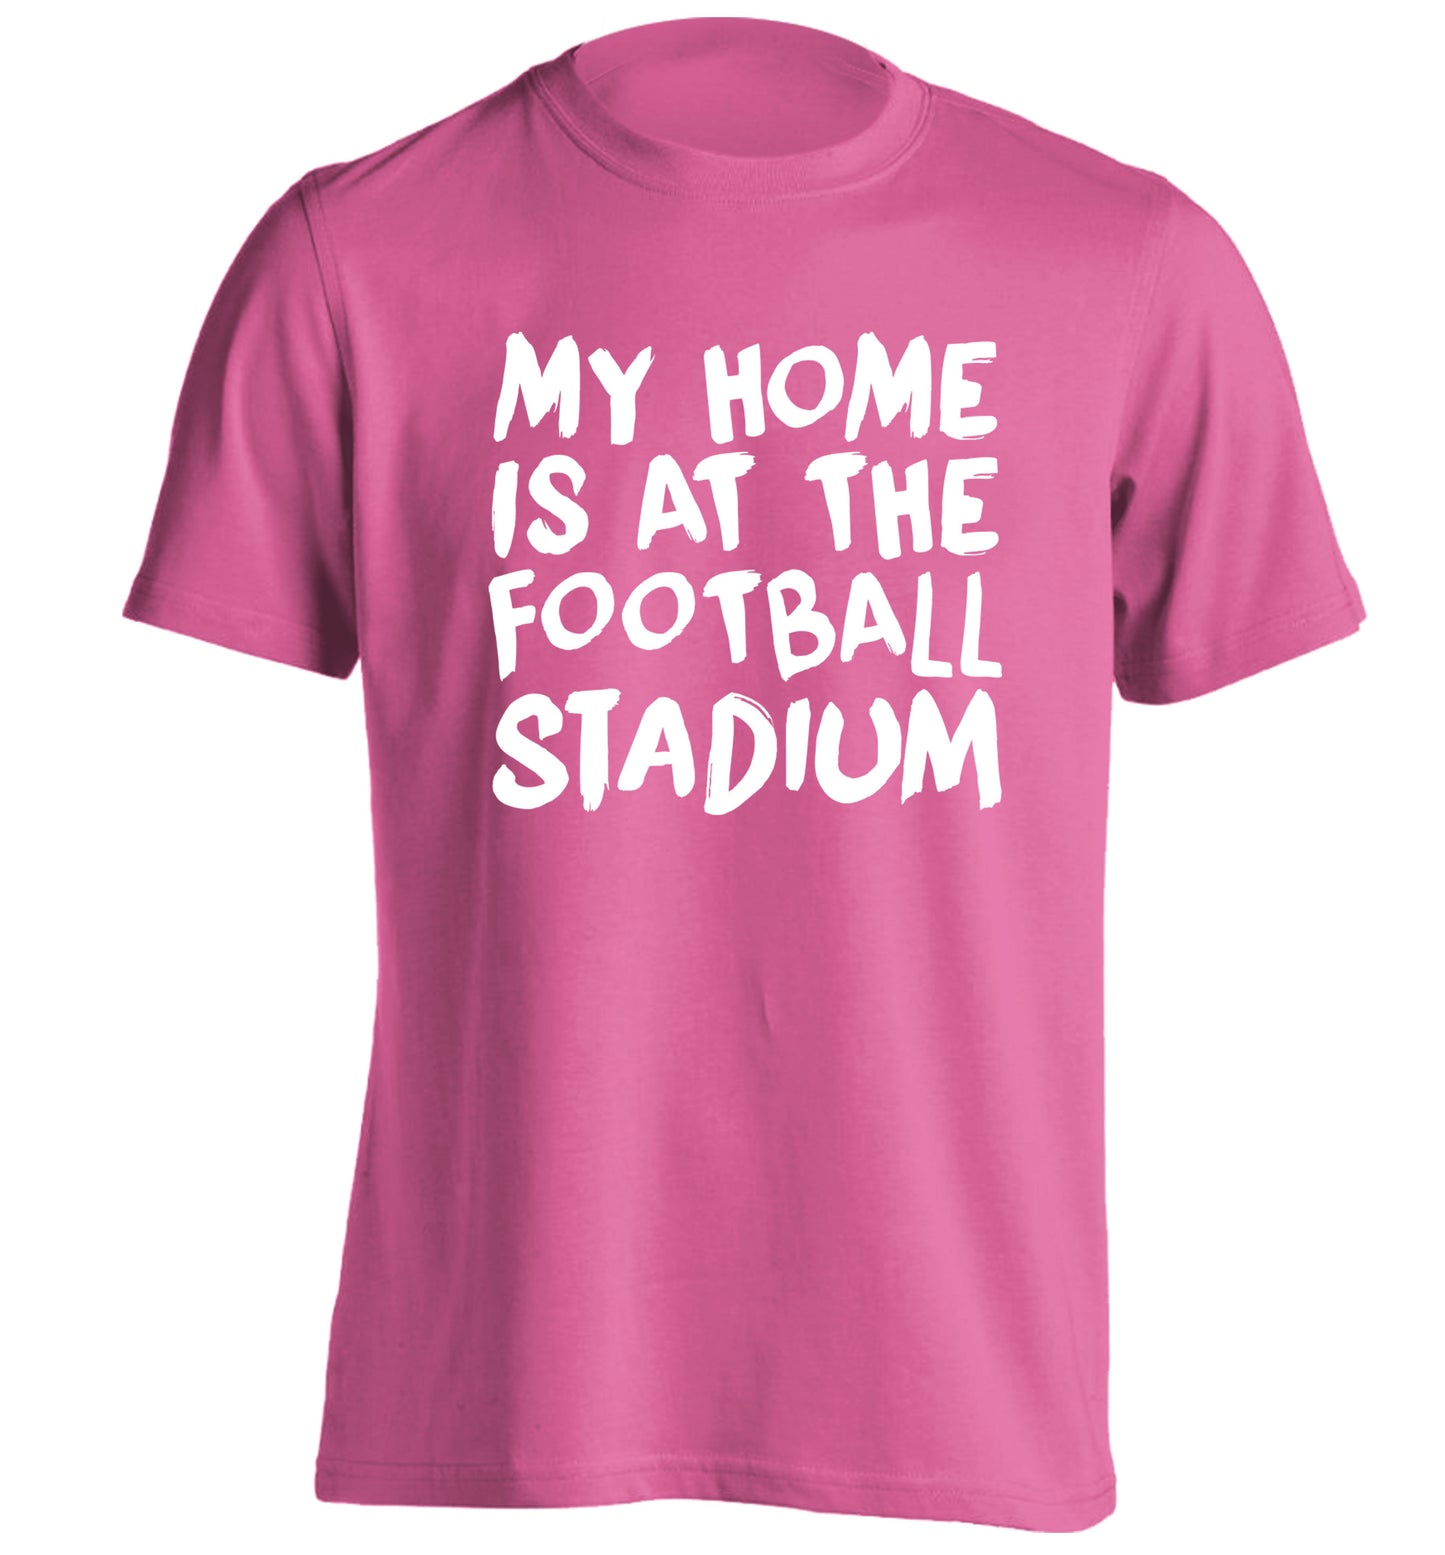 My home is at the football stadium adults unisex pink Tshirt 2XL